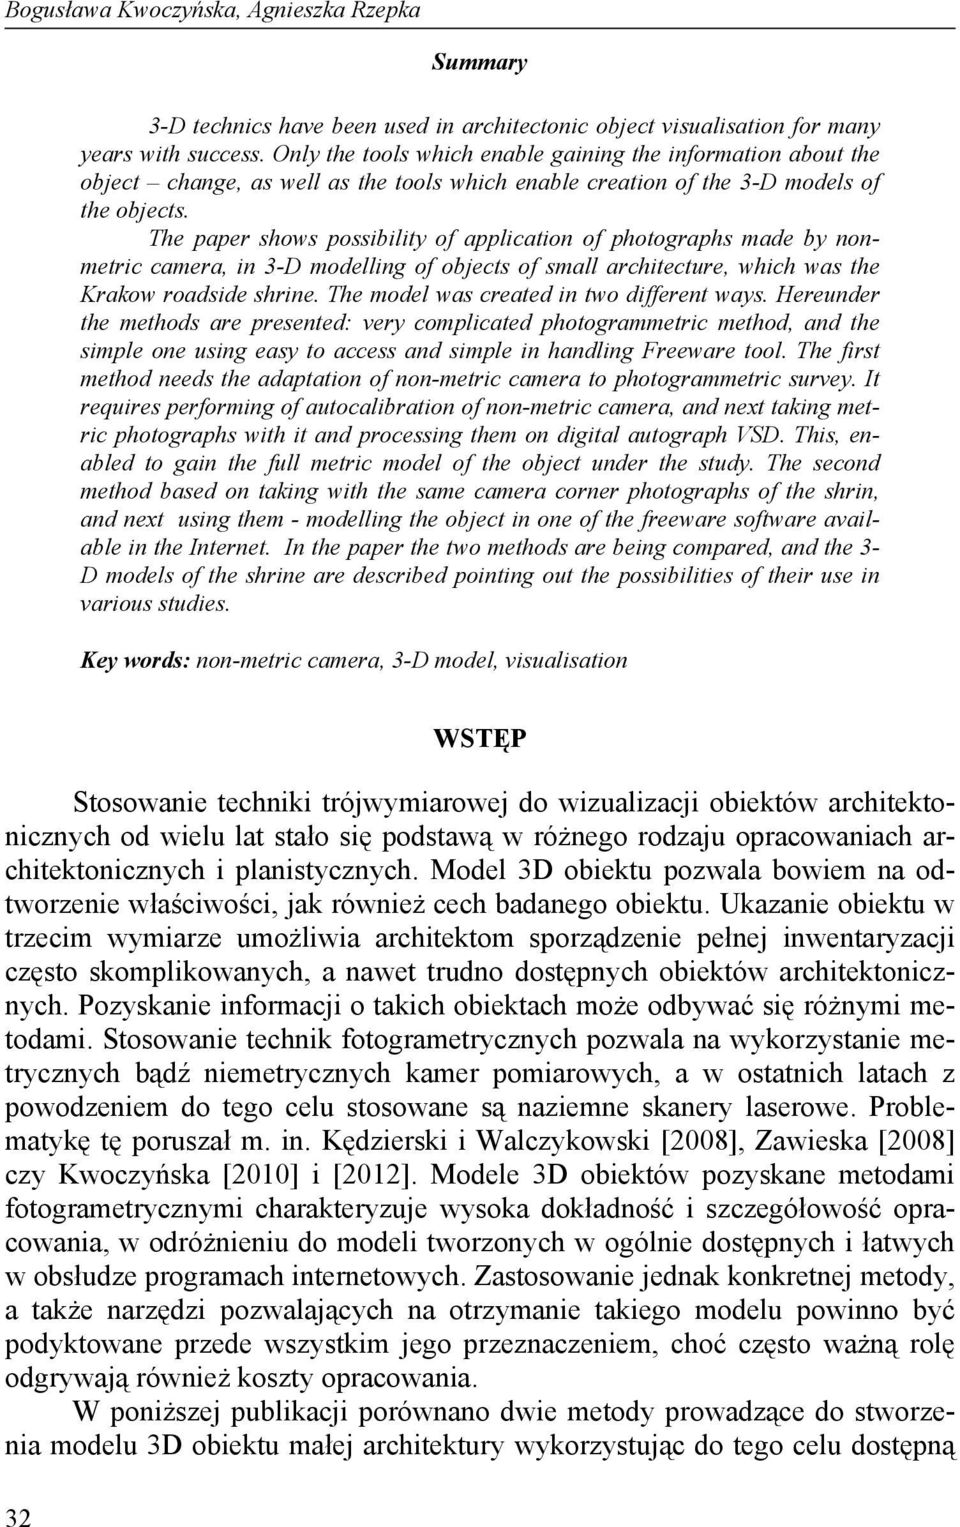 The paper shows possibility of application of photographs made by nonmetric camera, in 3-D modelling of objects of small architecture, which was the Krakow roadside shrine.